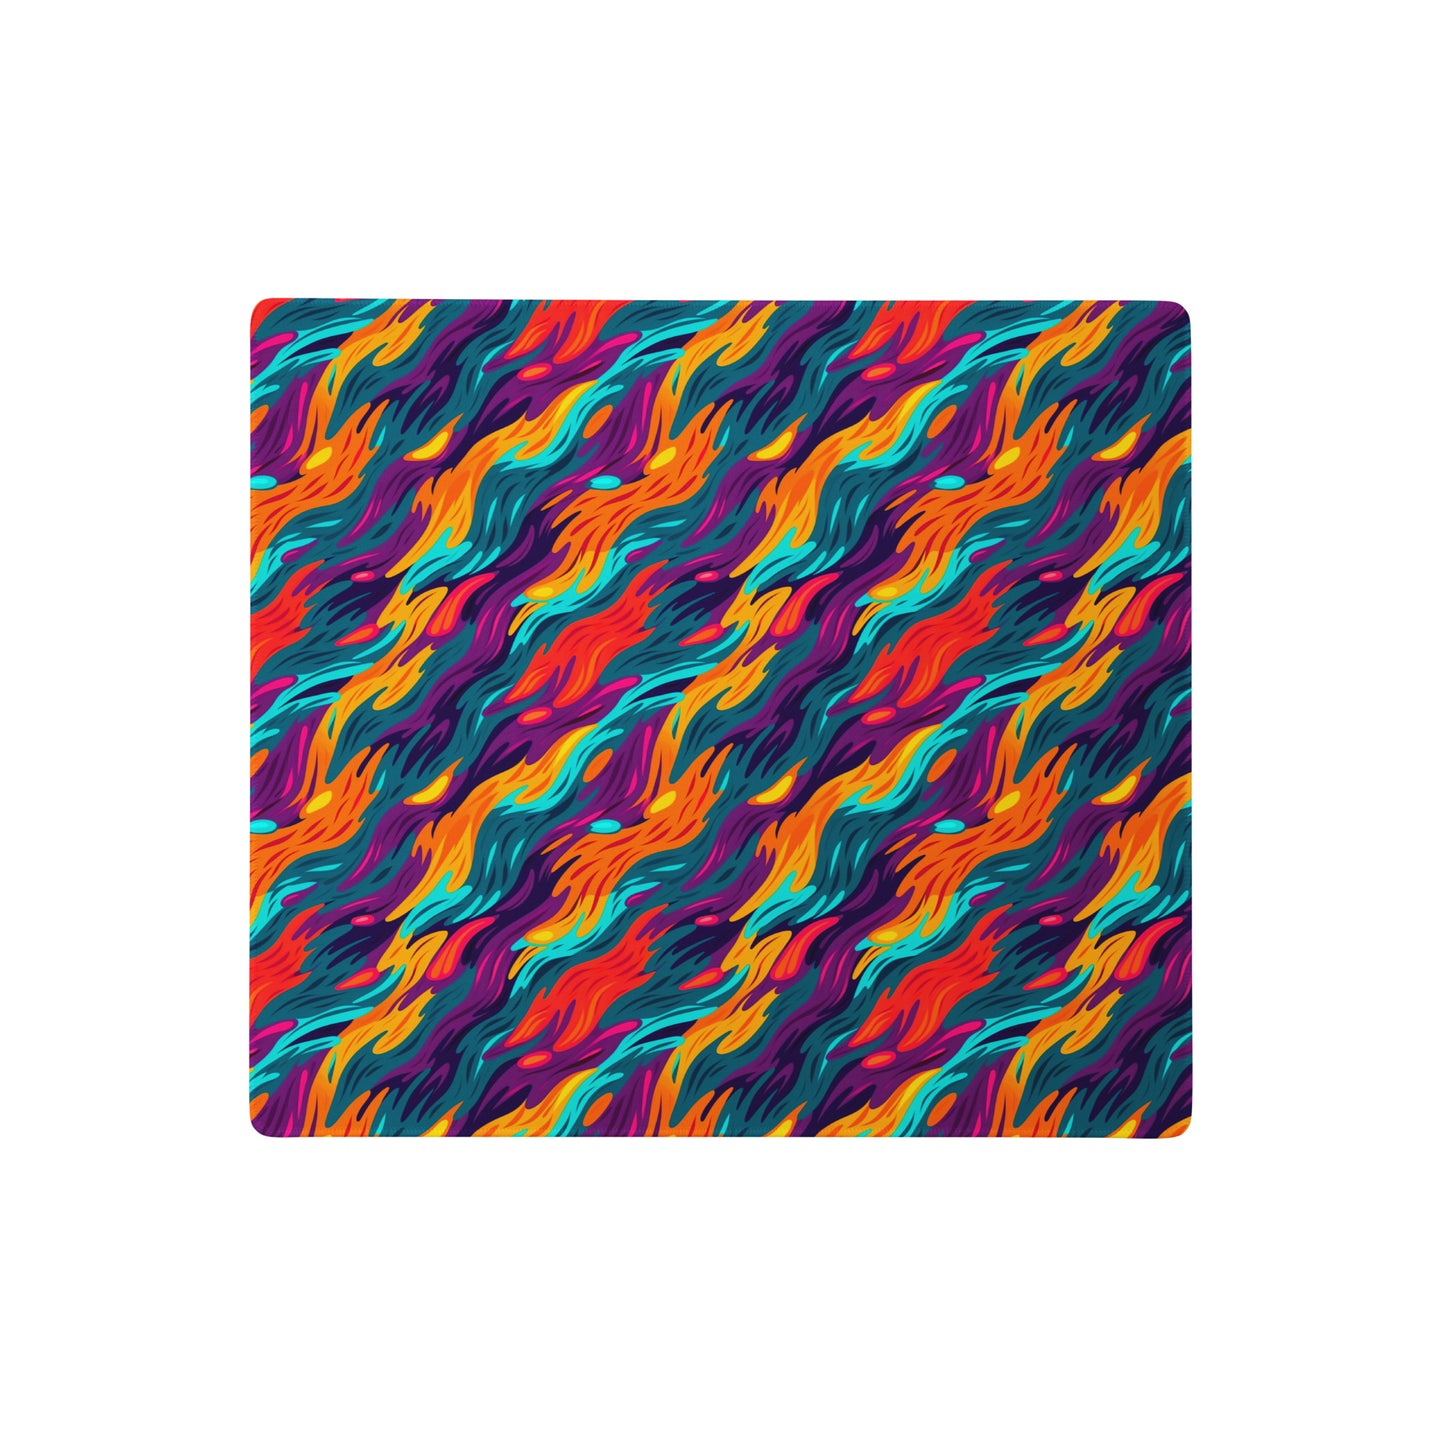 An 18" x 16" desk pad with a wavy flame pattern on it. Rainbow in color.